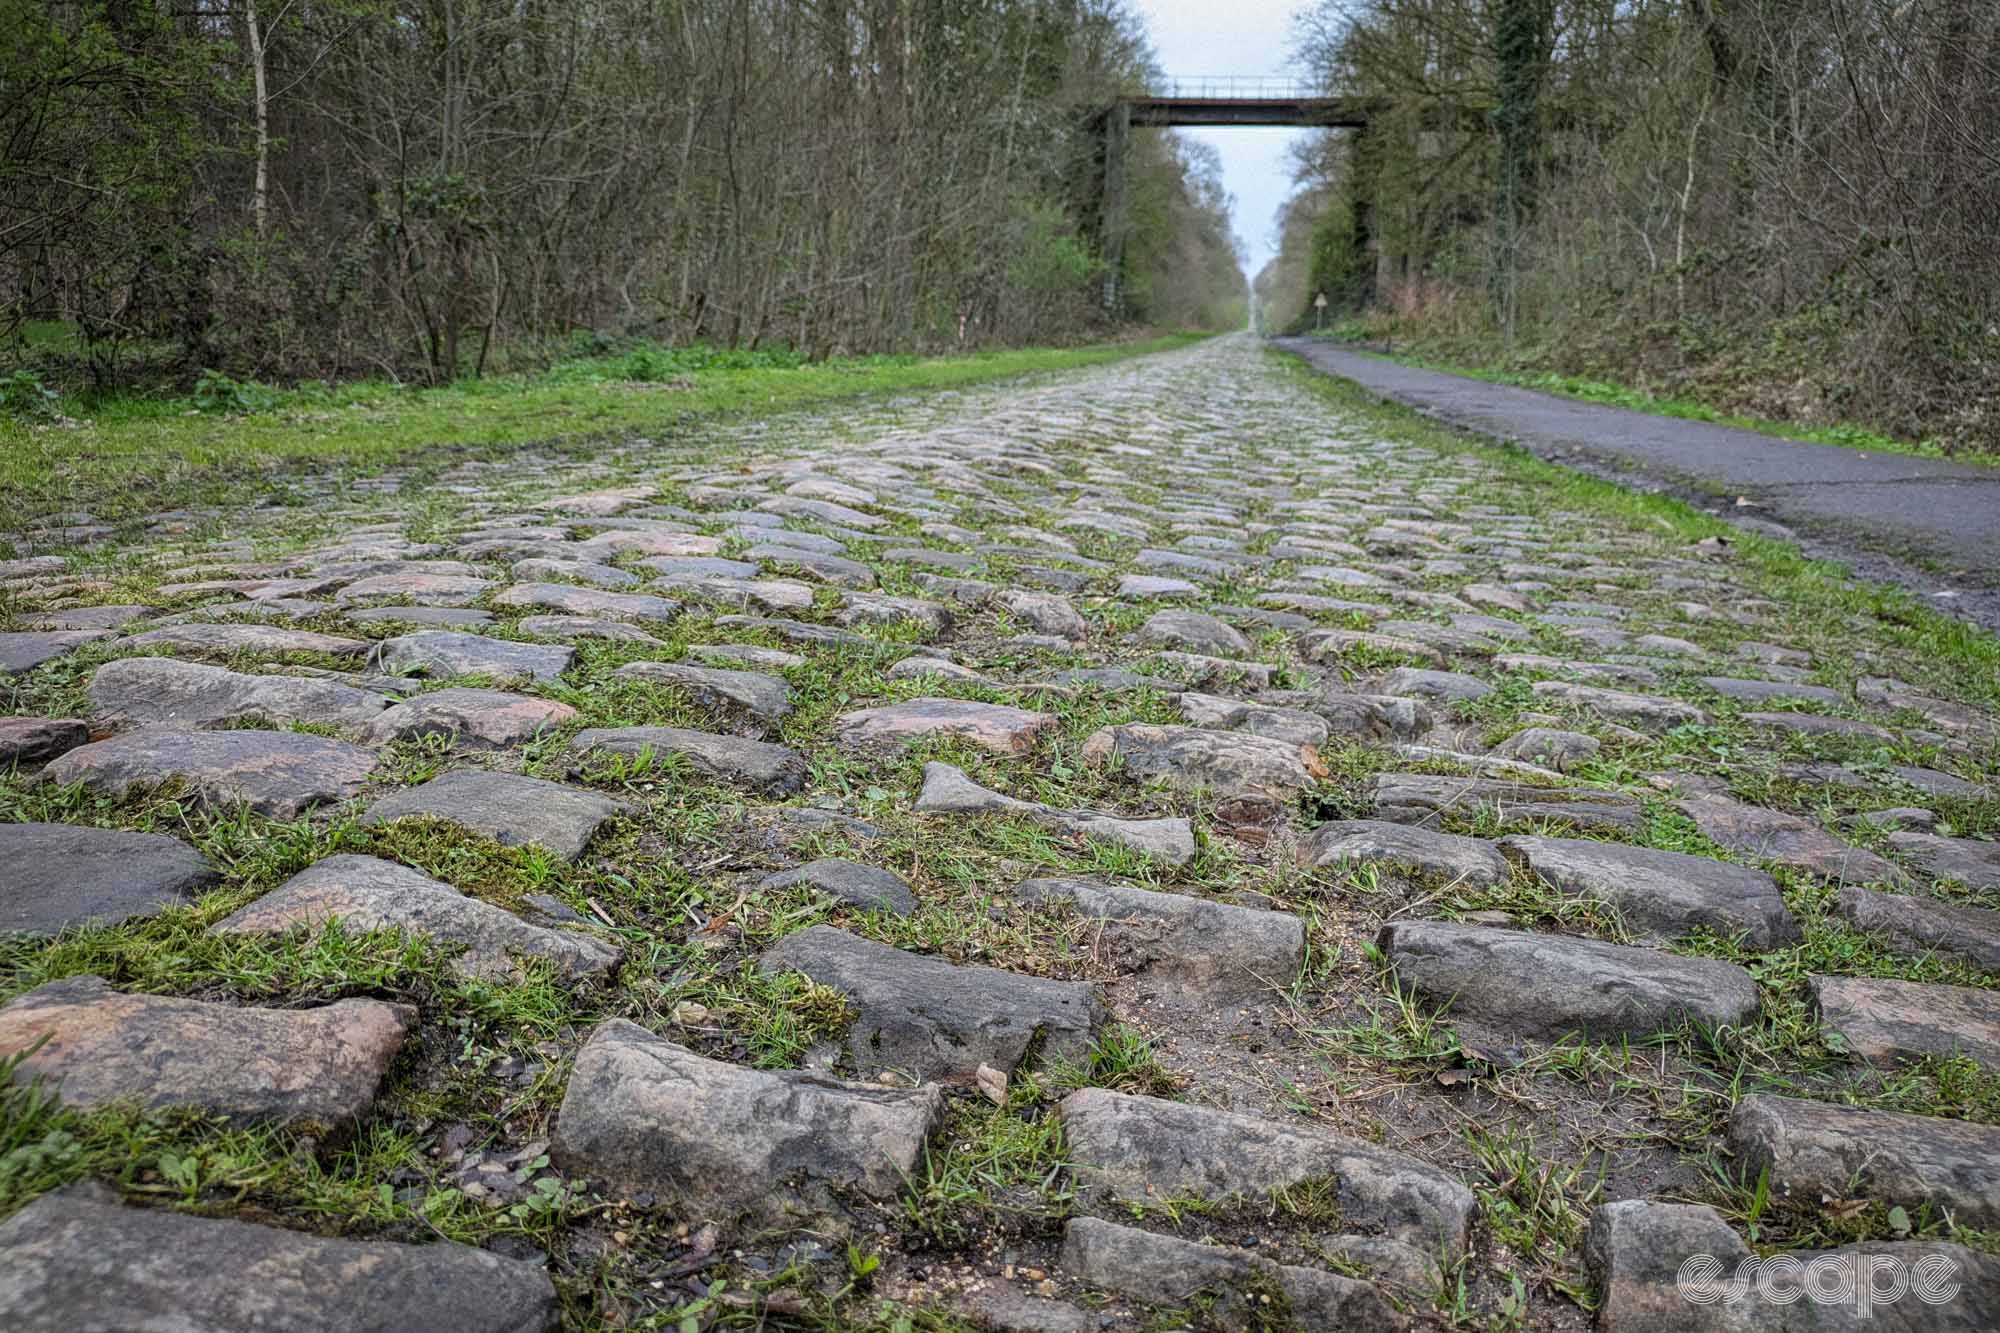 The Roubaix cobbles seen from ground level. The stones are sharp and irregular, widely spaced with green moss and grass growing between them. On the right side is a paved path that will be off limits on race day. The forest hems in tight on the track, almost like two hedges, and the railway trestle looms at the top of the shot.